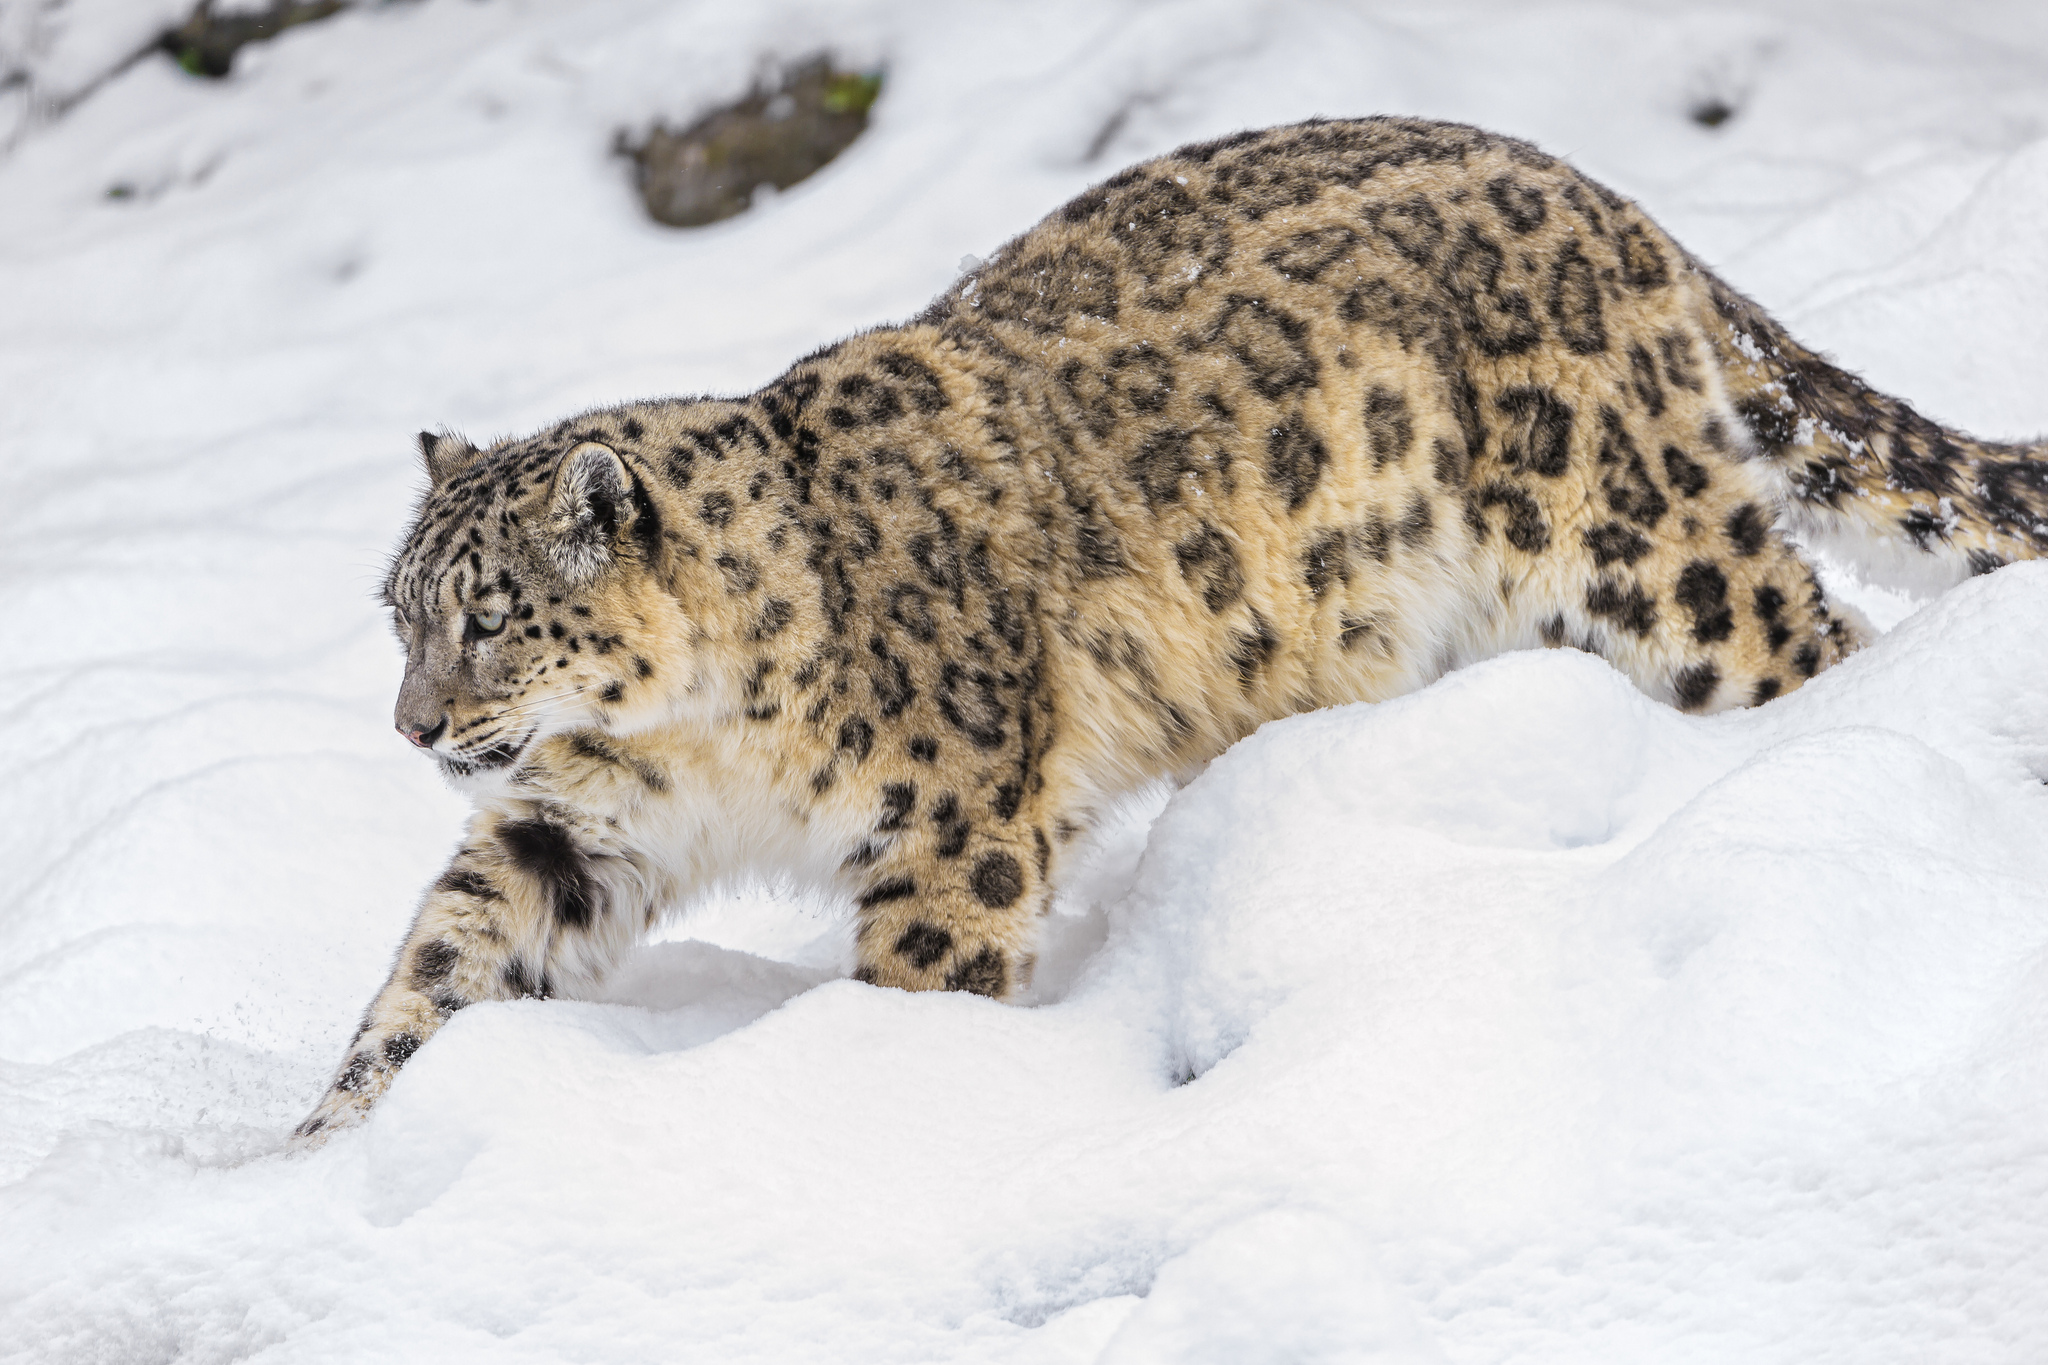 Impacts and Assessment of the Endangered Snow Leopard: A